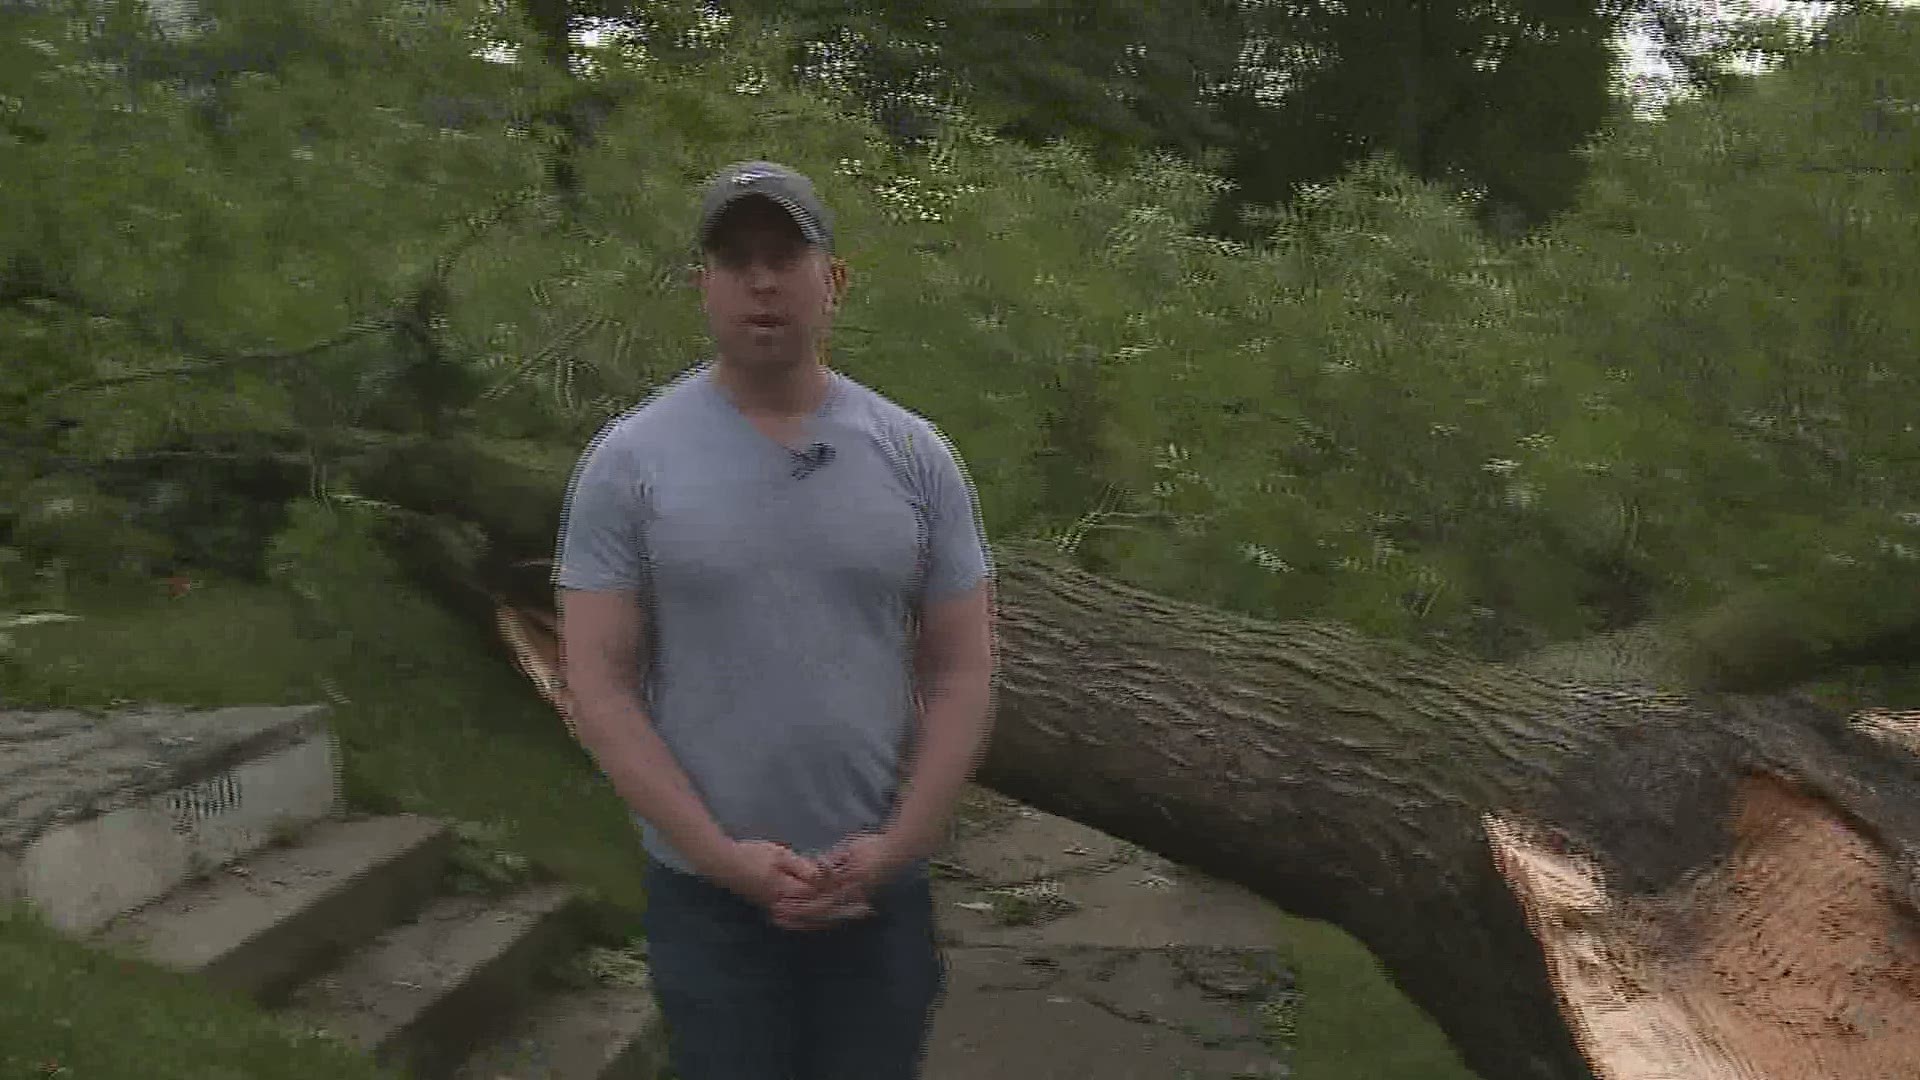 Strong winds tear down trees in East Davenport during derecho